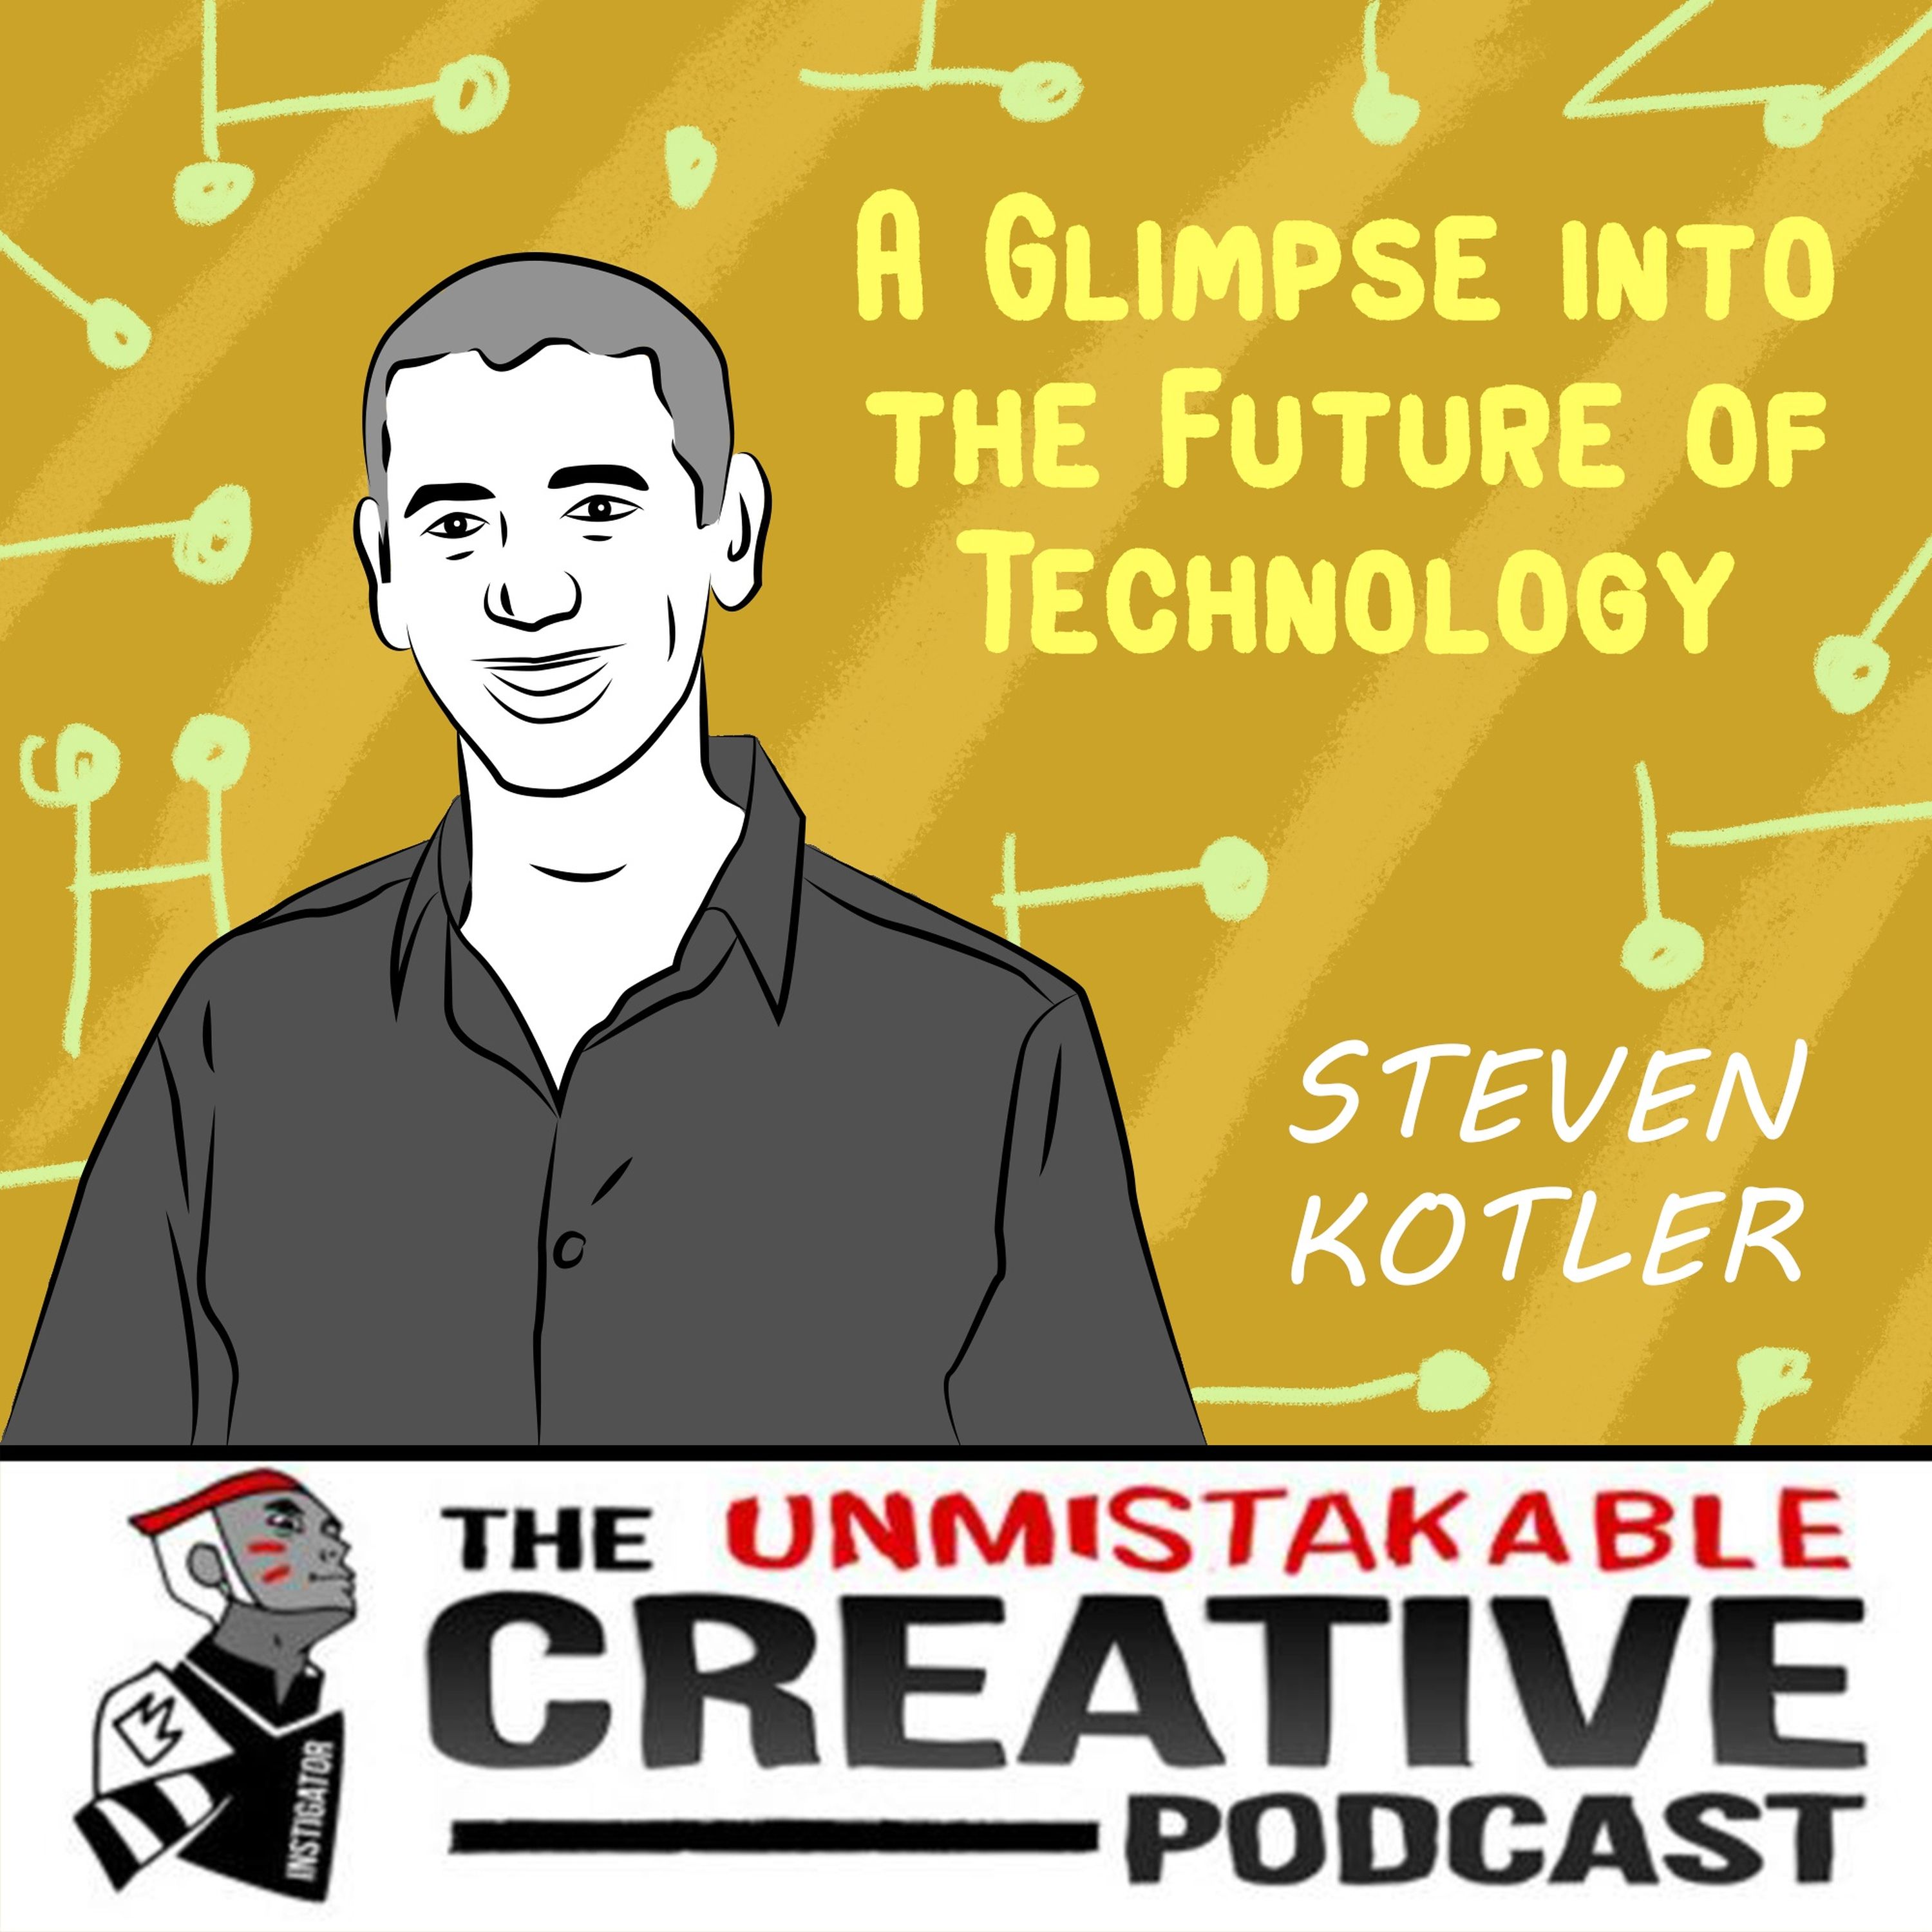 A Glimpse into the Future of Technology with Steven Kotler